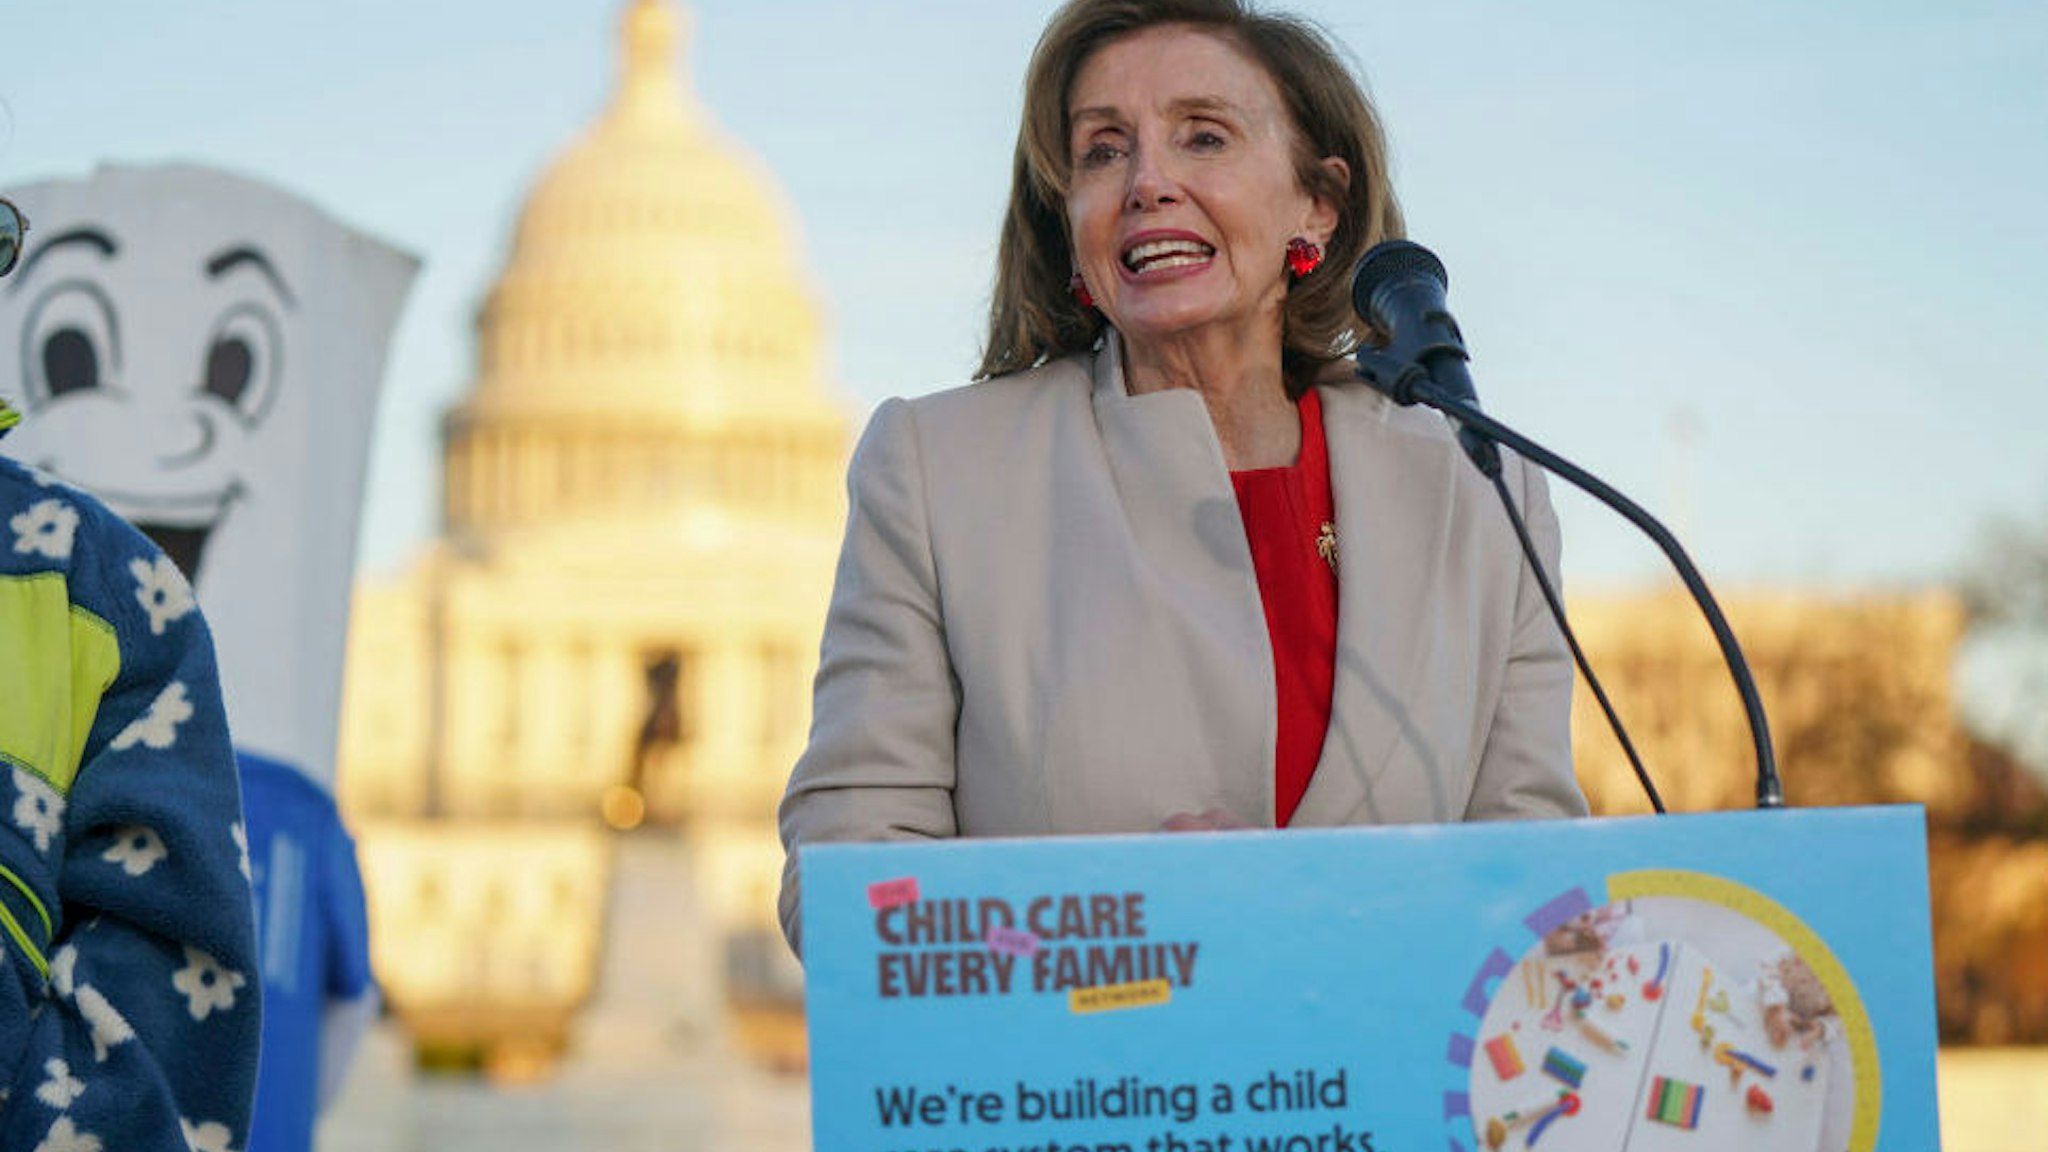 Speaker of the House Nancy Pelosi (D-CA) speaks during Child Care Providers and Parents Rally to Pass Build Back Better at the U.S. Capitol on December 14, 2021 in Washington, DC.